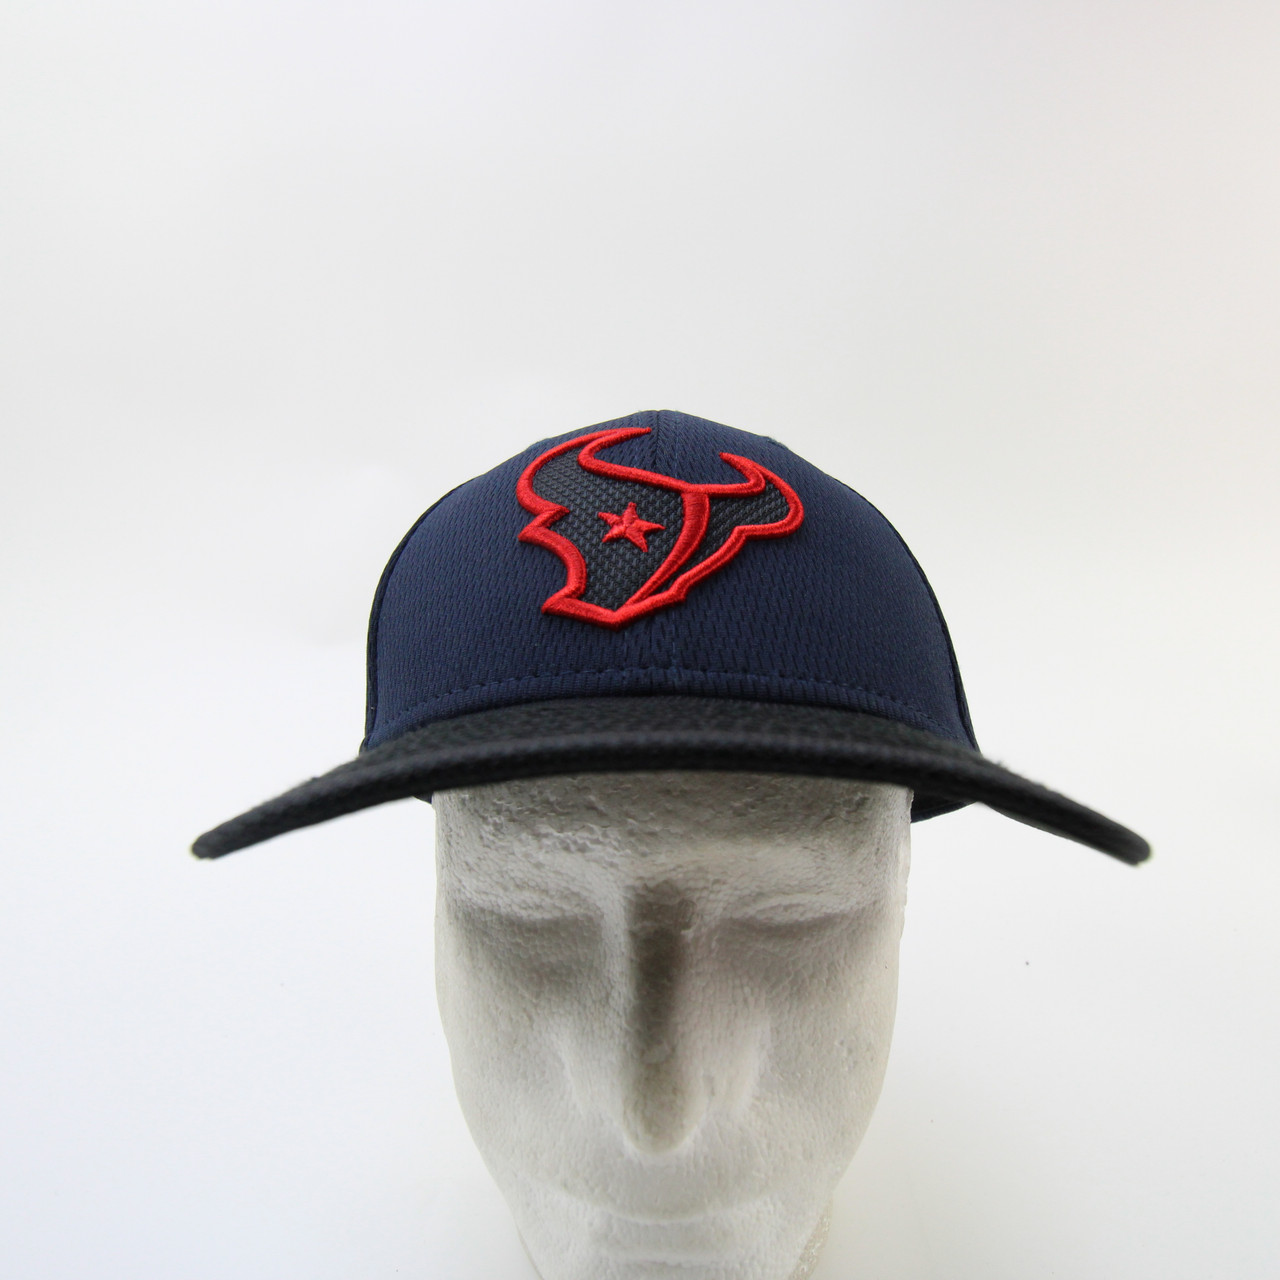 Houston Texans New Era 59fifty Fitted Hat Unisex Navy/Black Used 7-1/2 -  Locker Room Direct